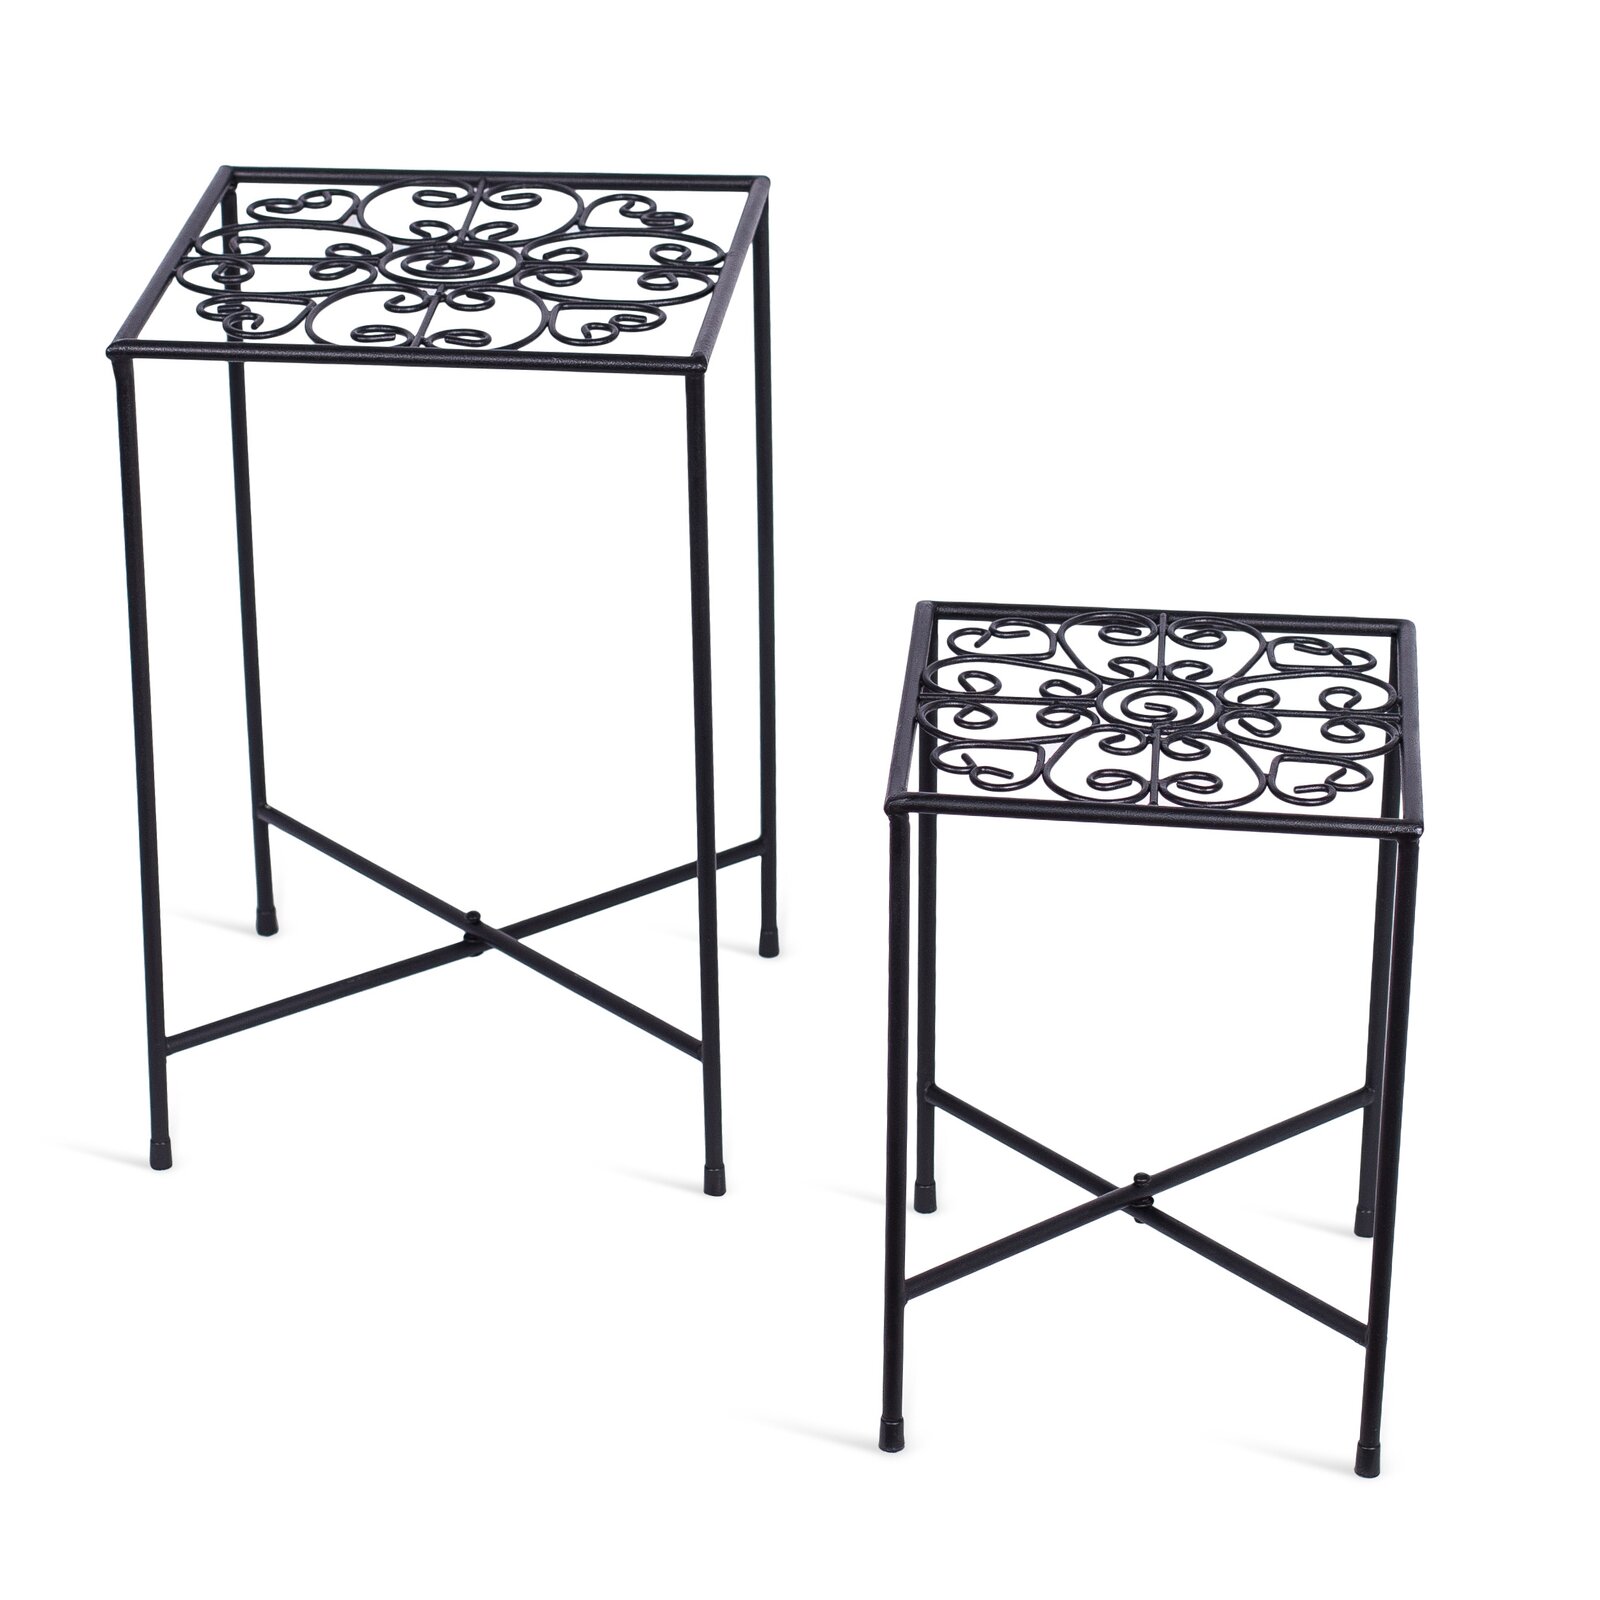 Red Barrel Studio? Set Of 2 Metal Plant Stands - Small & Medium Sizes - Decorative Scroll Design - Lightweight Folding - Black Metal Holder - Indoor Or Outdoor Use - Great For Small Spaces - Small Size